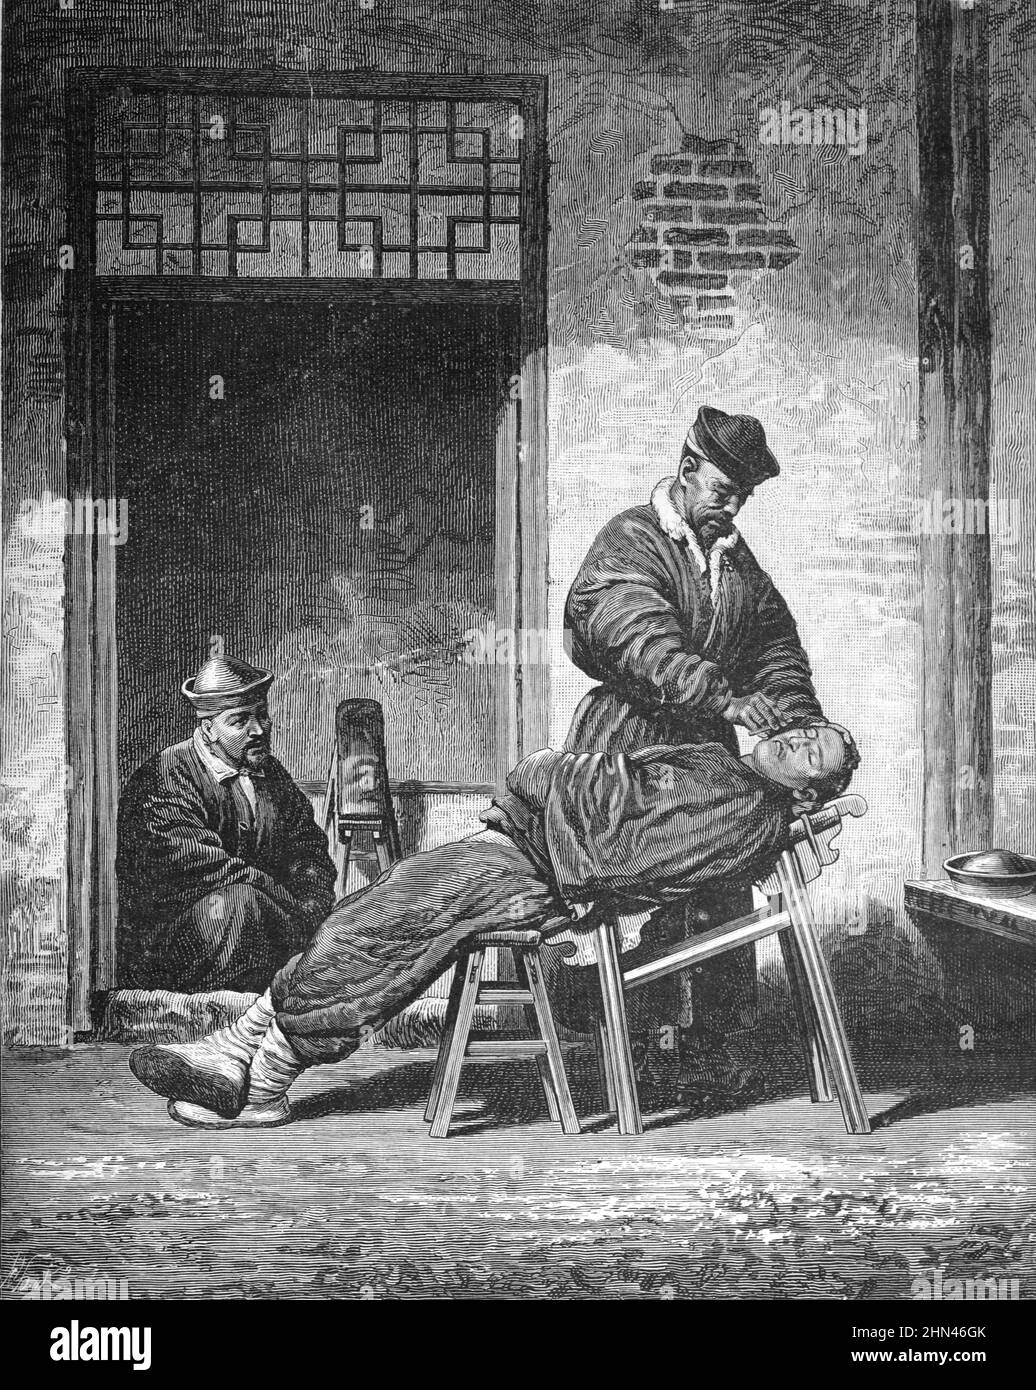 Barber, Barbershop or Barbers Shop with Makeshift Wooden Barber's Chair in Street in Indochina or Vietnam. Vintage Illustration or Engraving 1881 Stock Photo